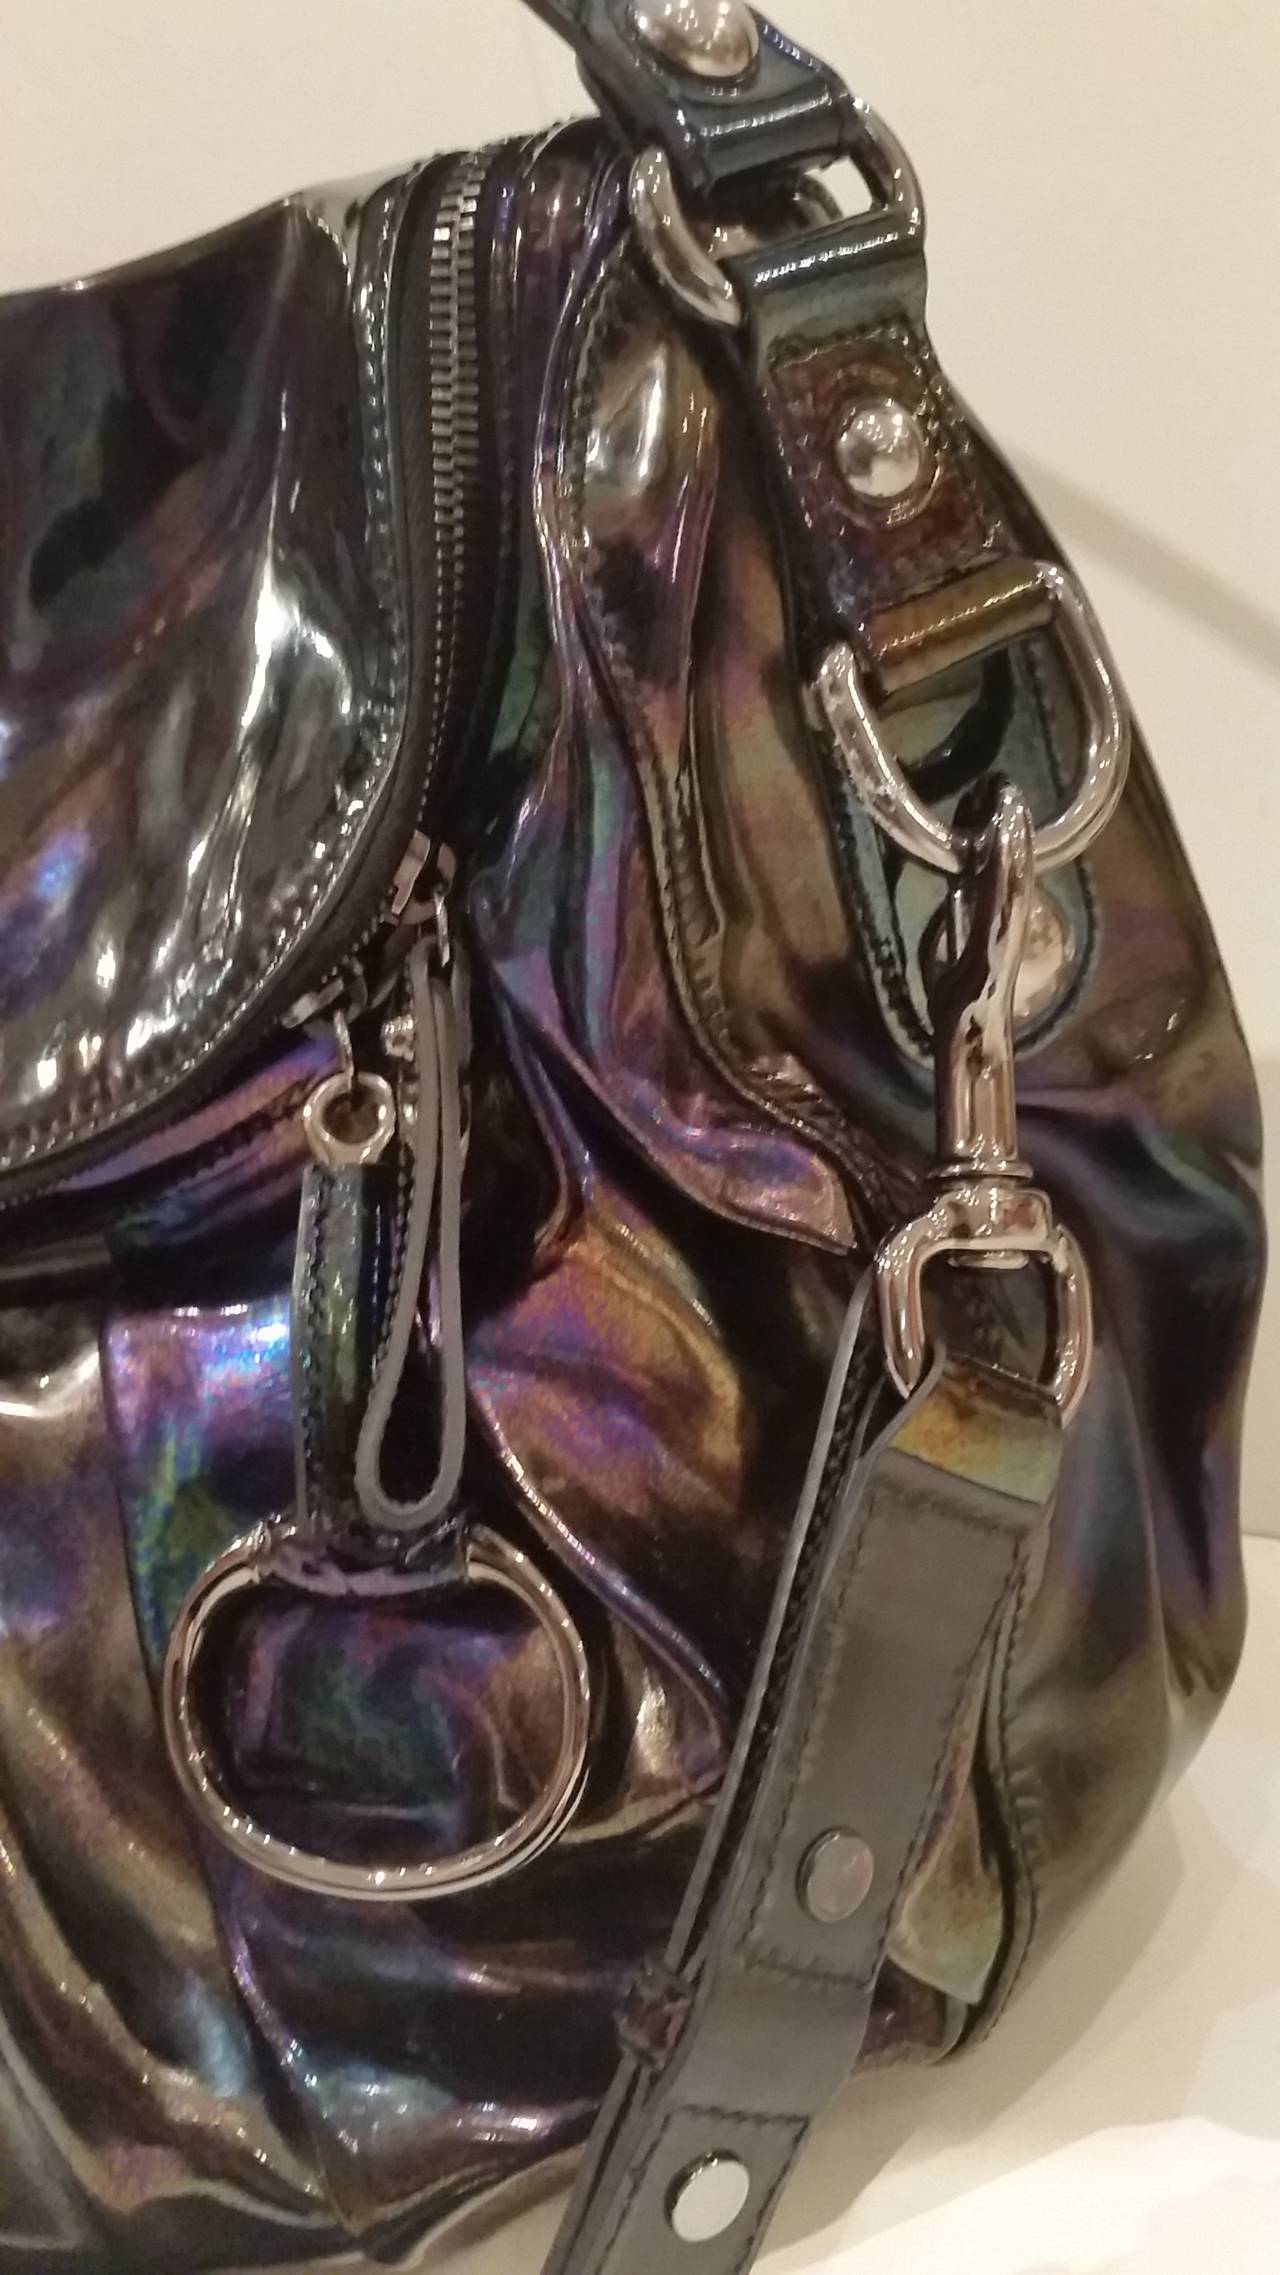 This Gucci Metallic Icon Bit Hobo Bag is made from metallic leather with a petrol spill finish. The bag has a zip fastening and features a carry handle together with a removable, adjustable shoulder strap. The metal work on the bag is silver in